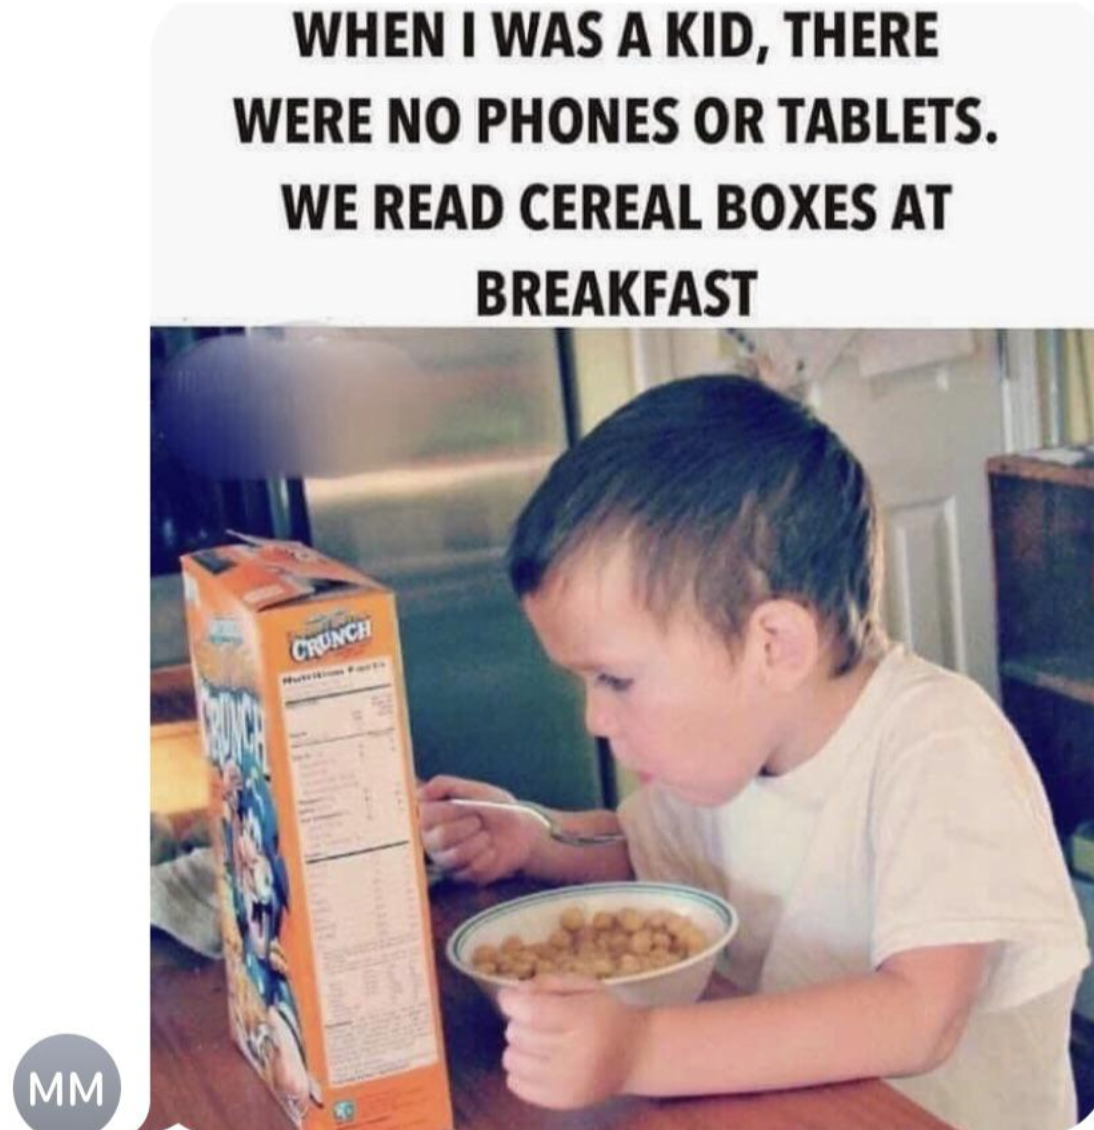 kid there were no phones or tablets we read cereal boxes at breakfast - Mm When I Was A Kid, There Were No Phones Or Tablets. We Read Cereal Boxes At Breakfast Crunch